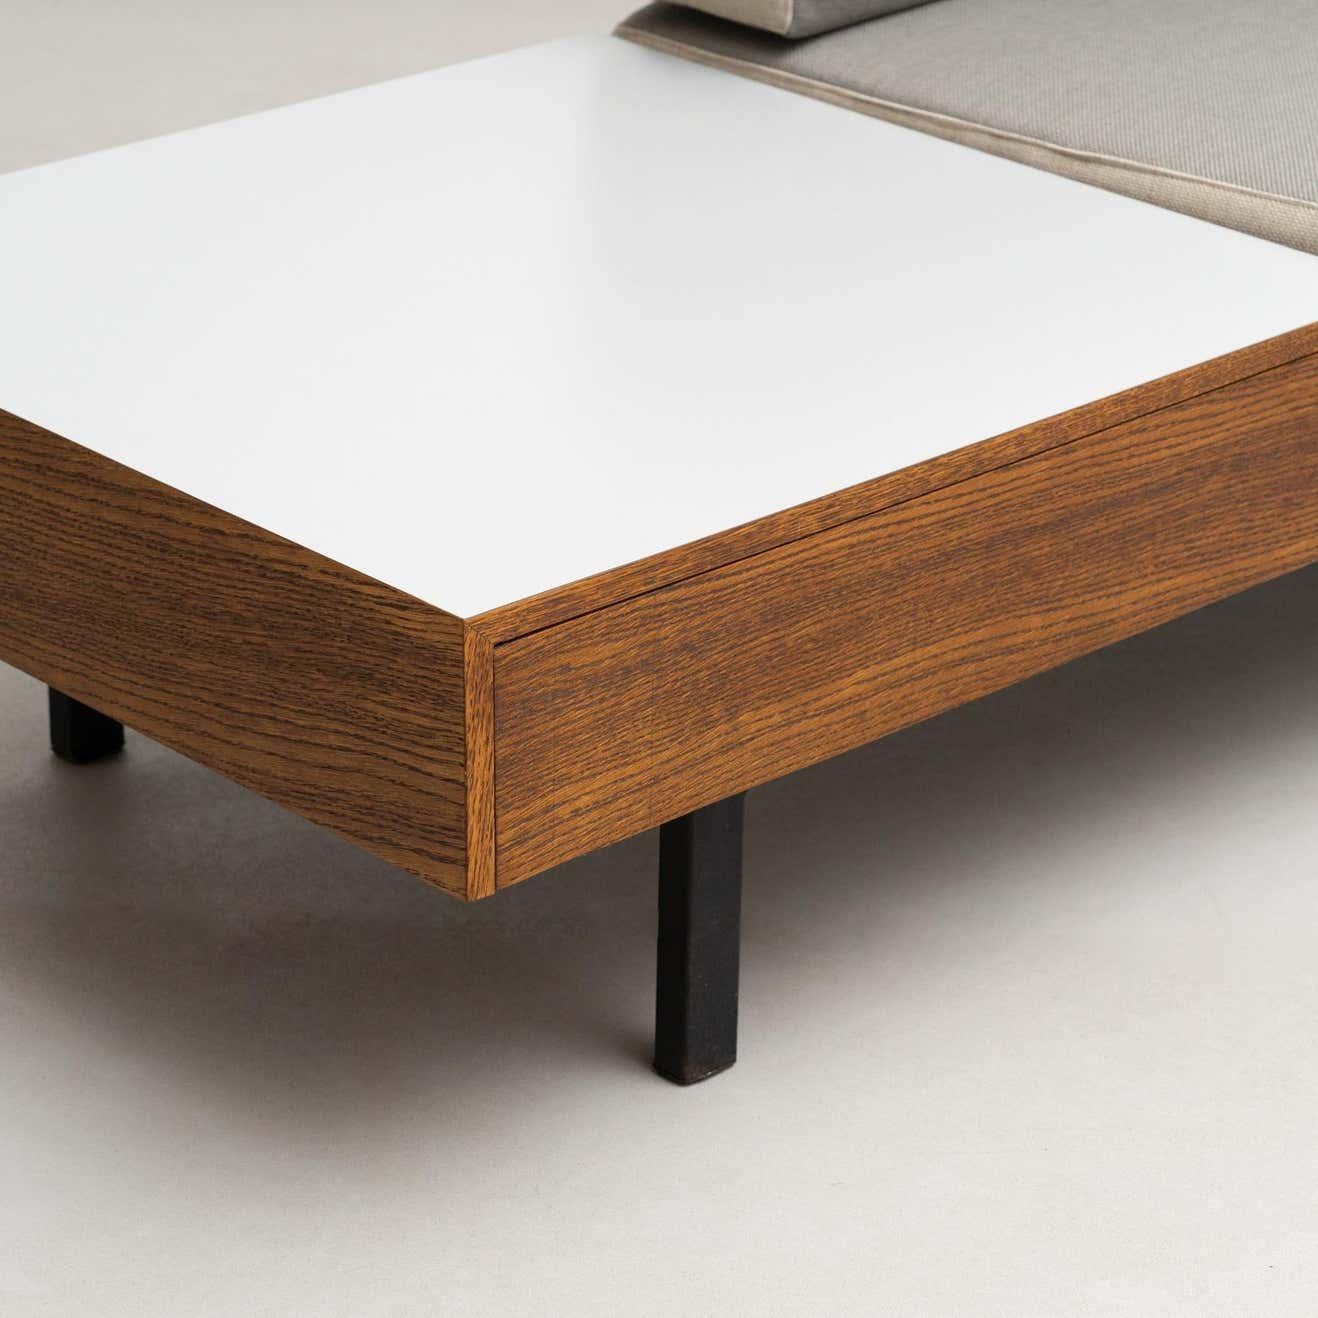 Mid-Century Modern Charlotte Perriand Cansado Bench with a Drawer, circa 1958 For Sale